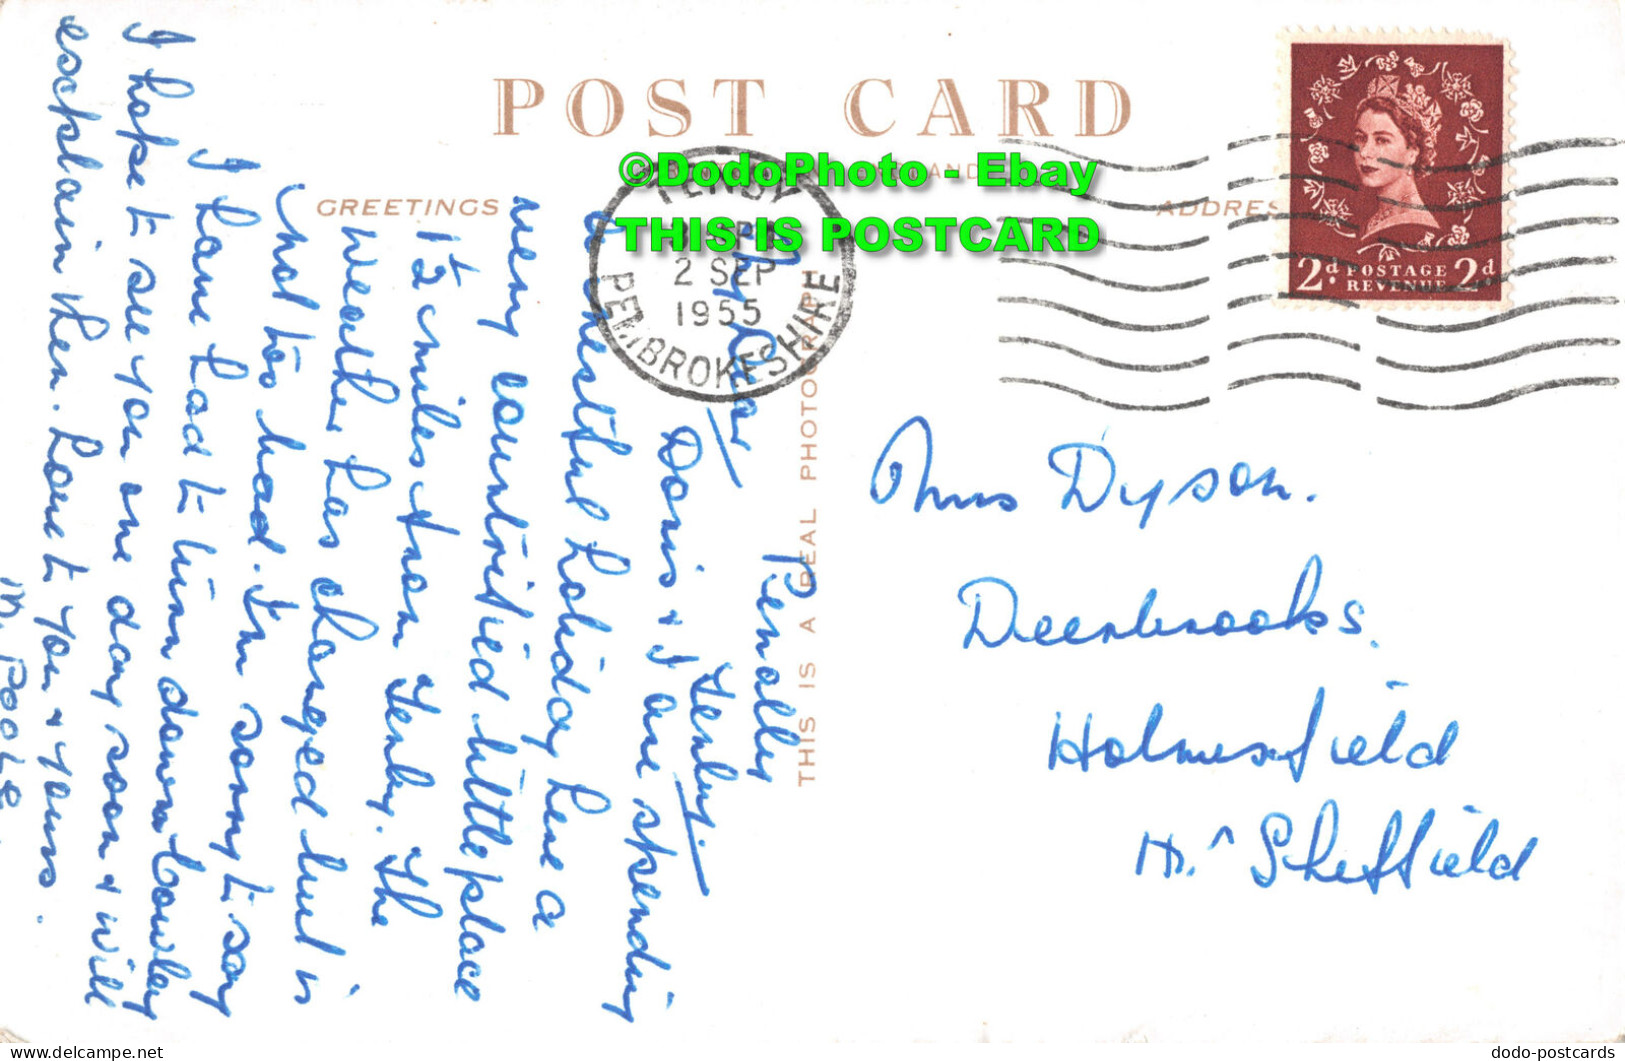 R454168 Tenby. The Golf Links. The Harbour Side. RP. Multi View. 1955 - World